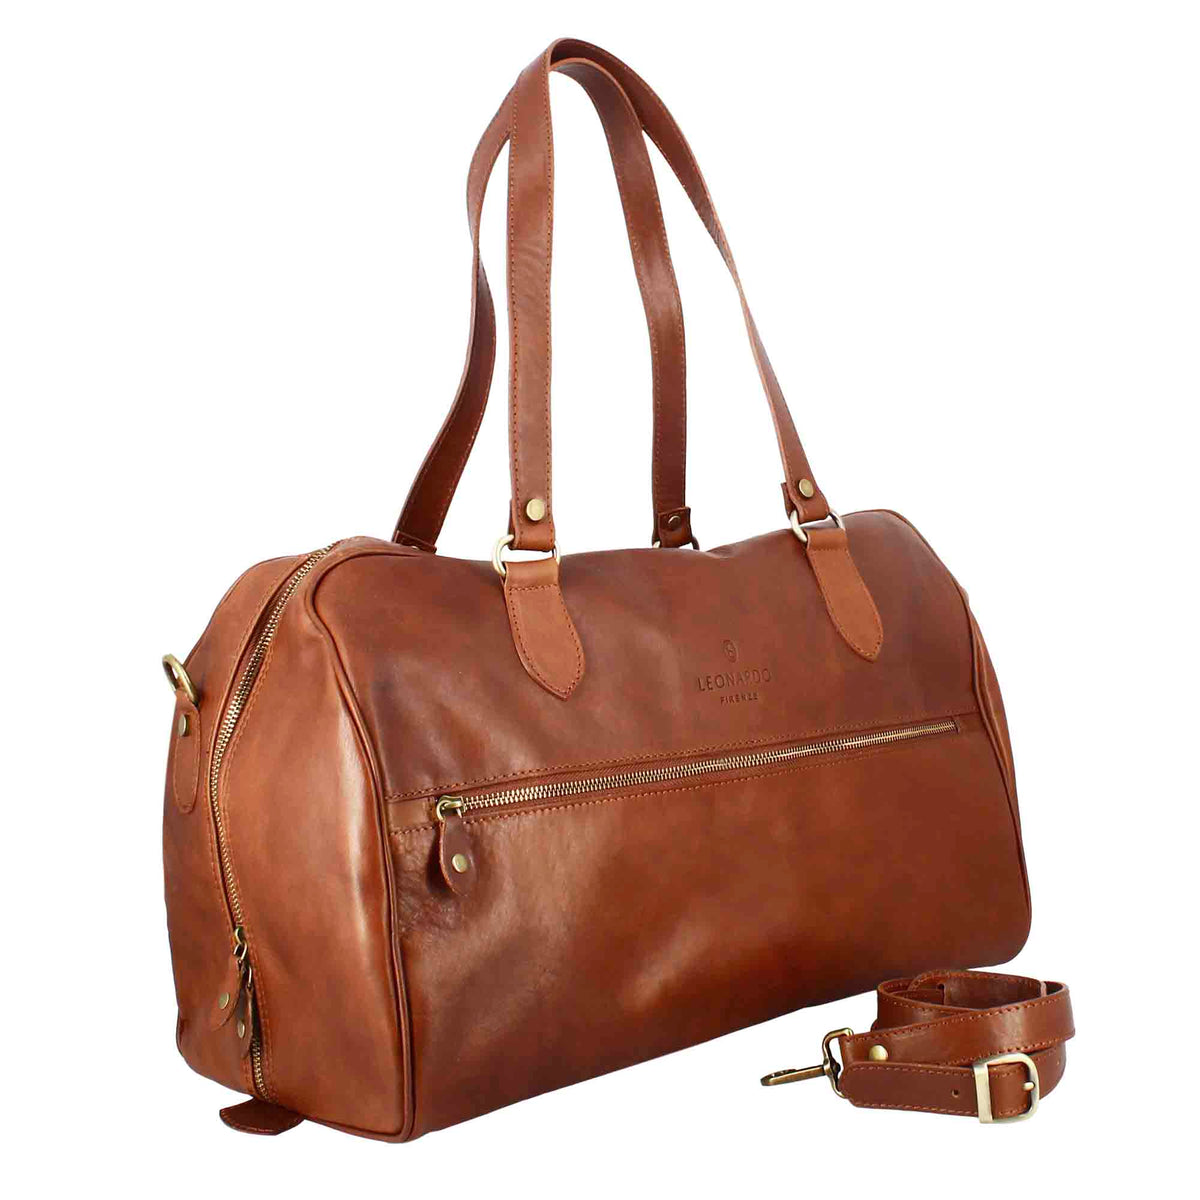 Brown leather travel bags with handles and removable shoulder strap